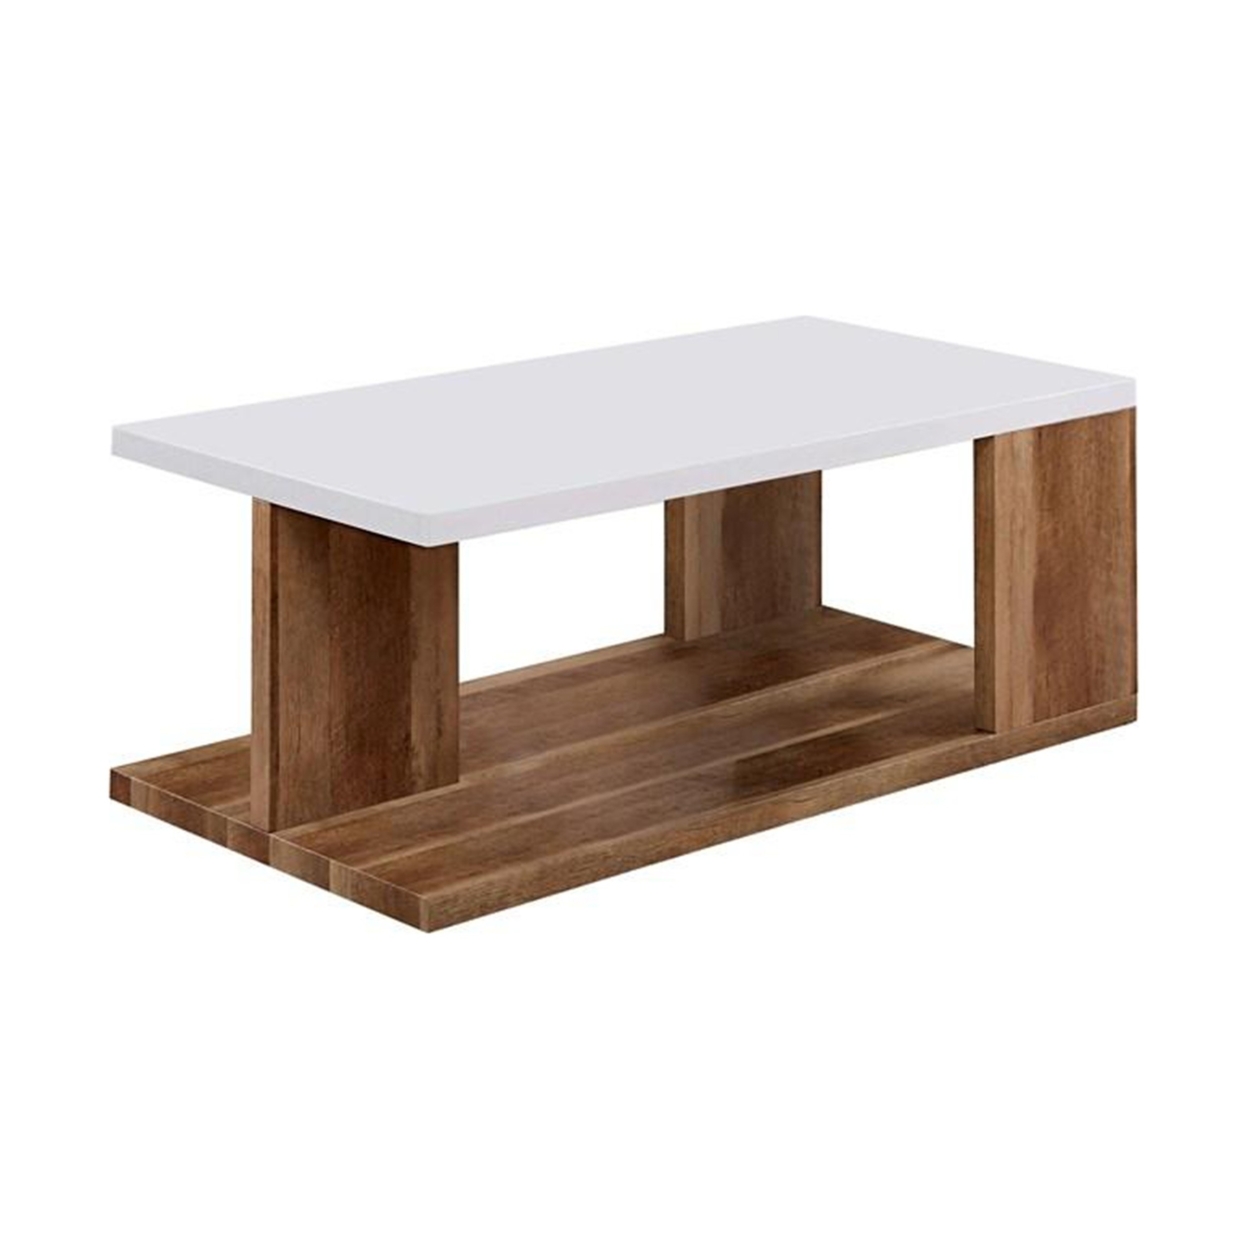 Coffee Table With Open Shelf And Rectangular Panel Legs, Brown And White- Saltoro Sherpi